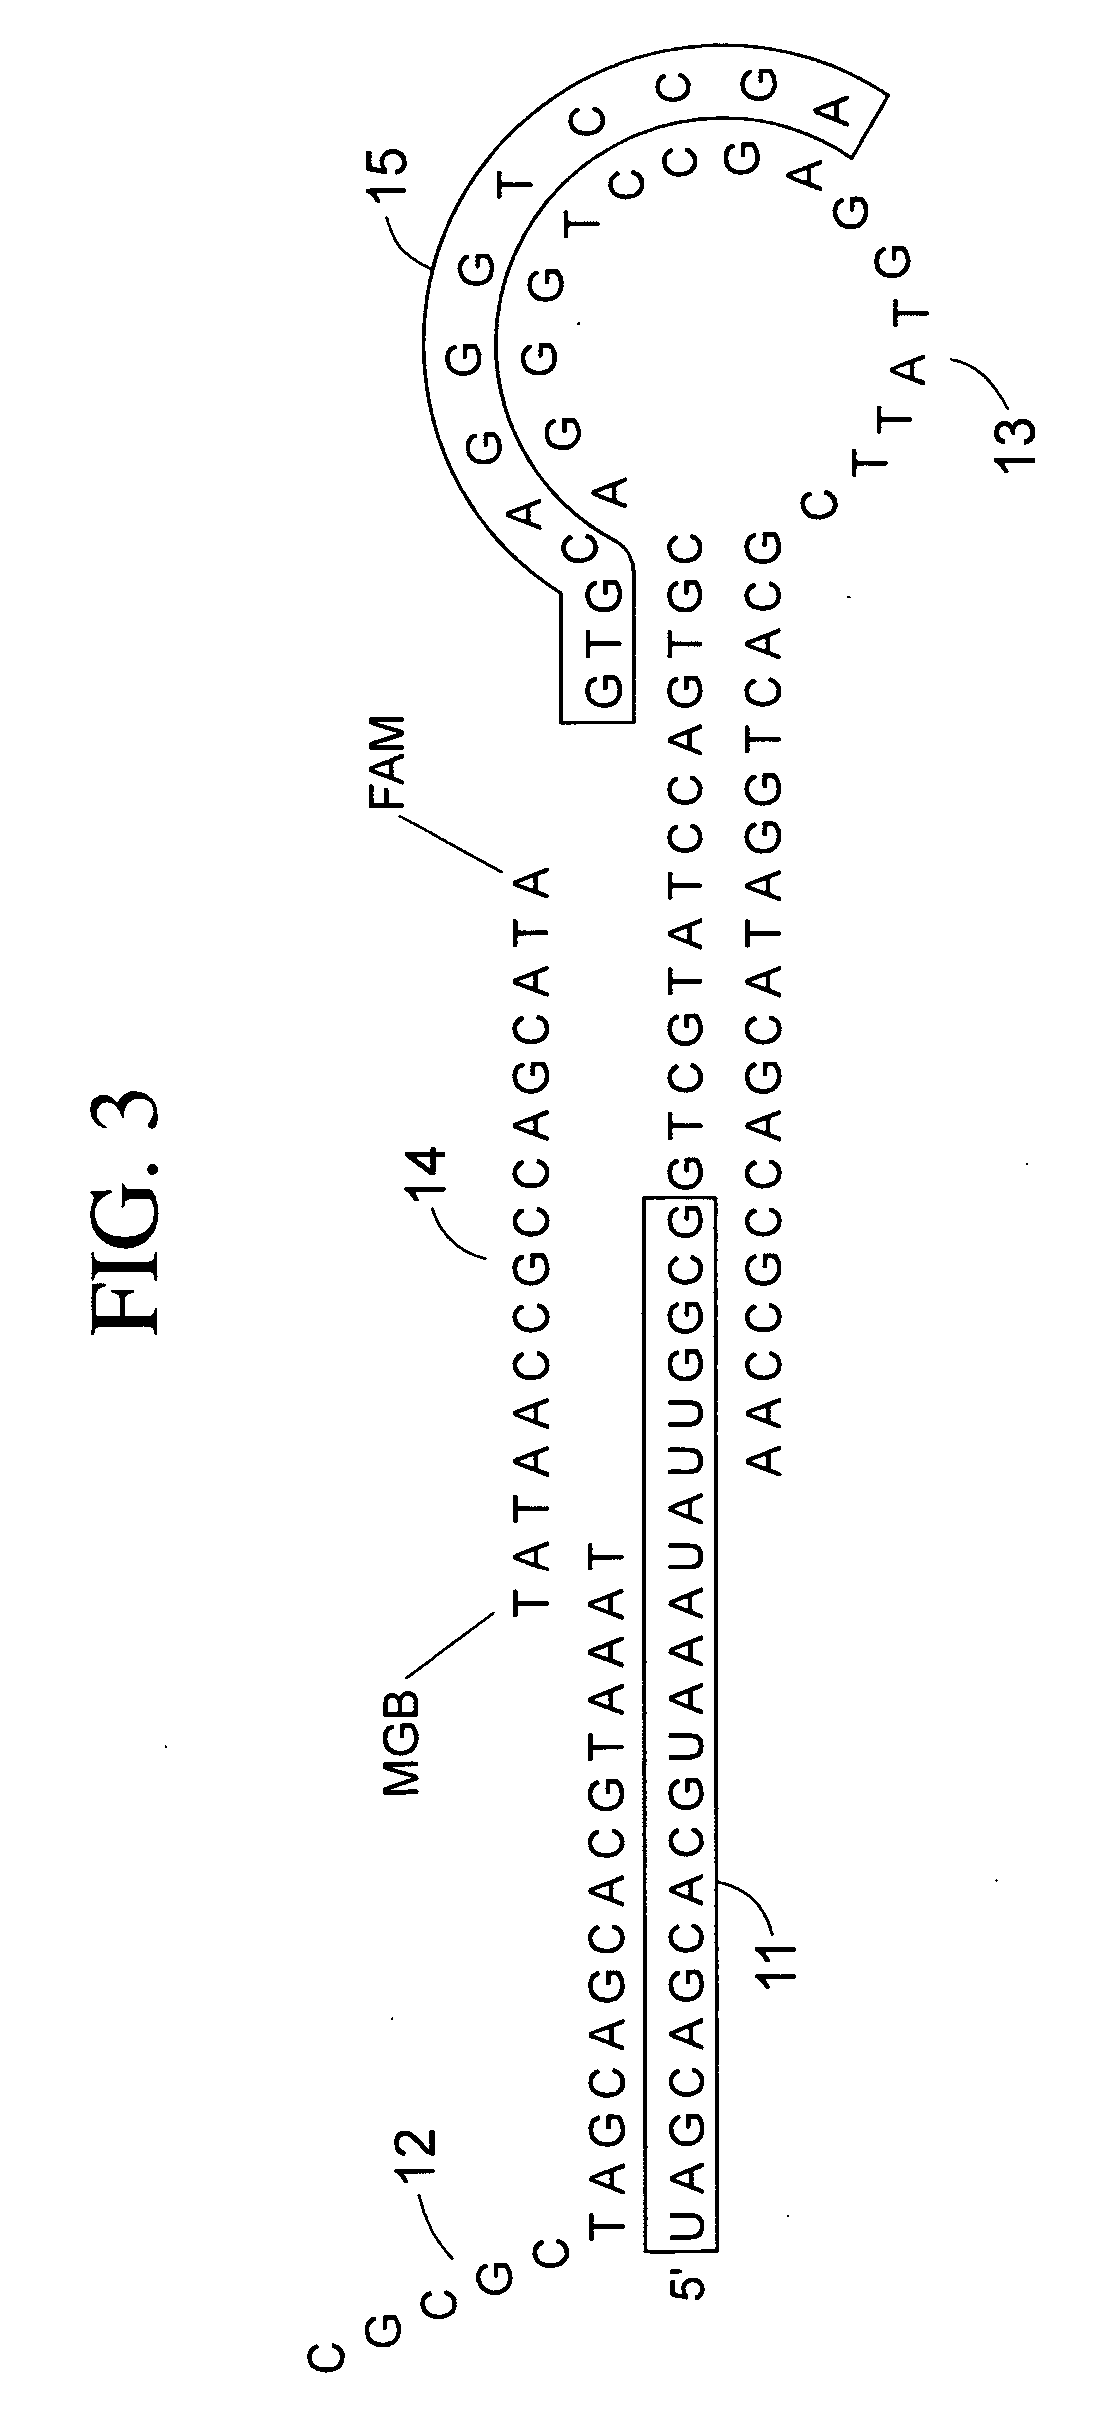 Methods for characterizing cells using amplified micro rnas